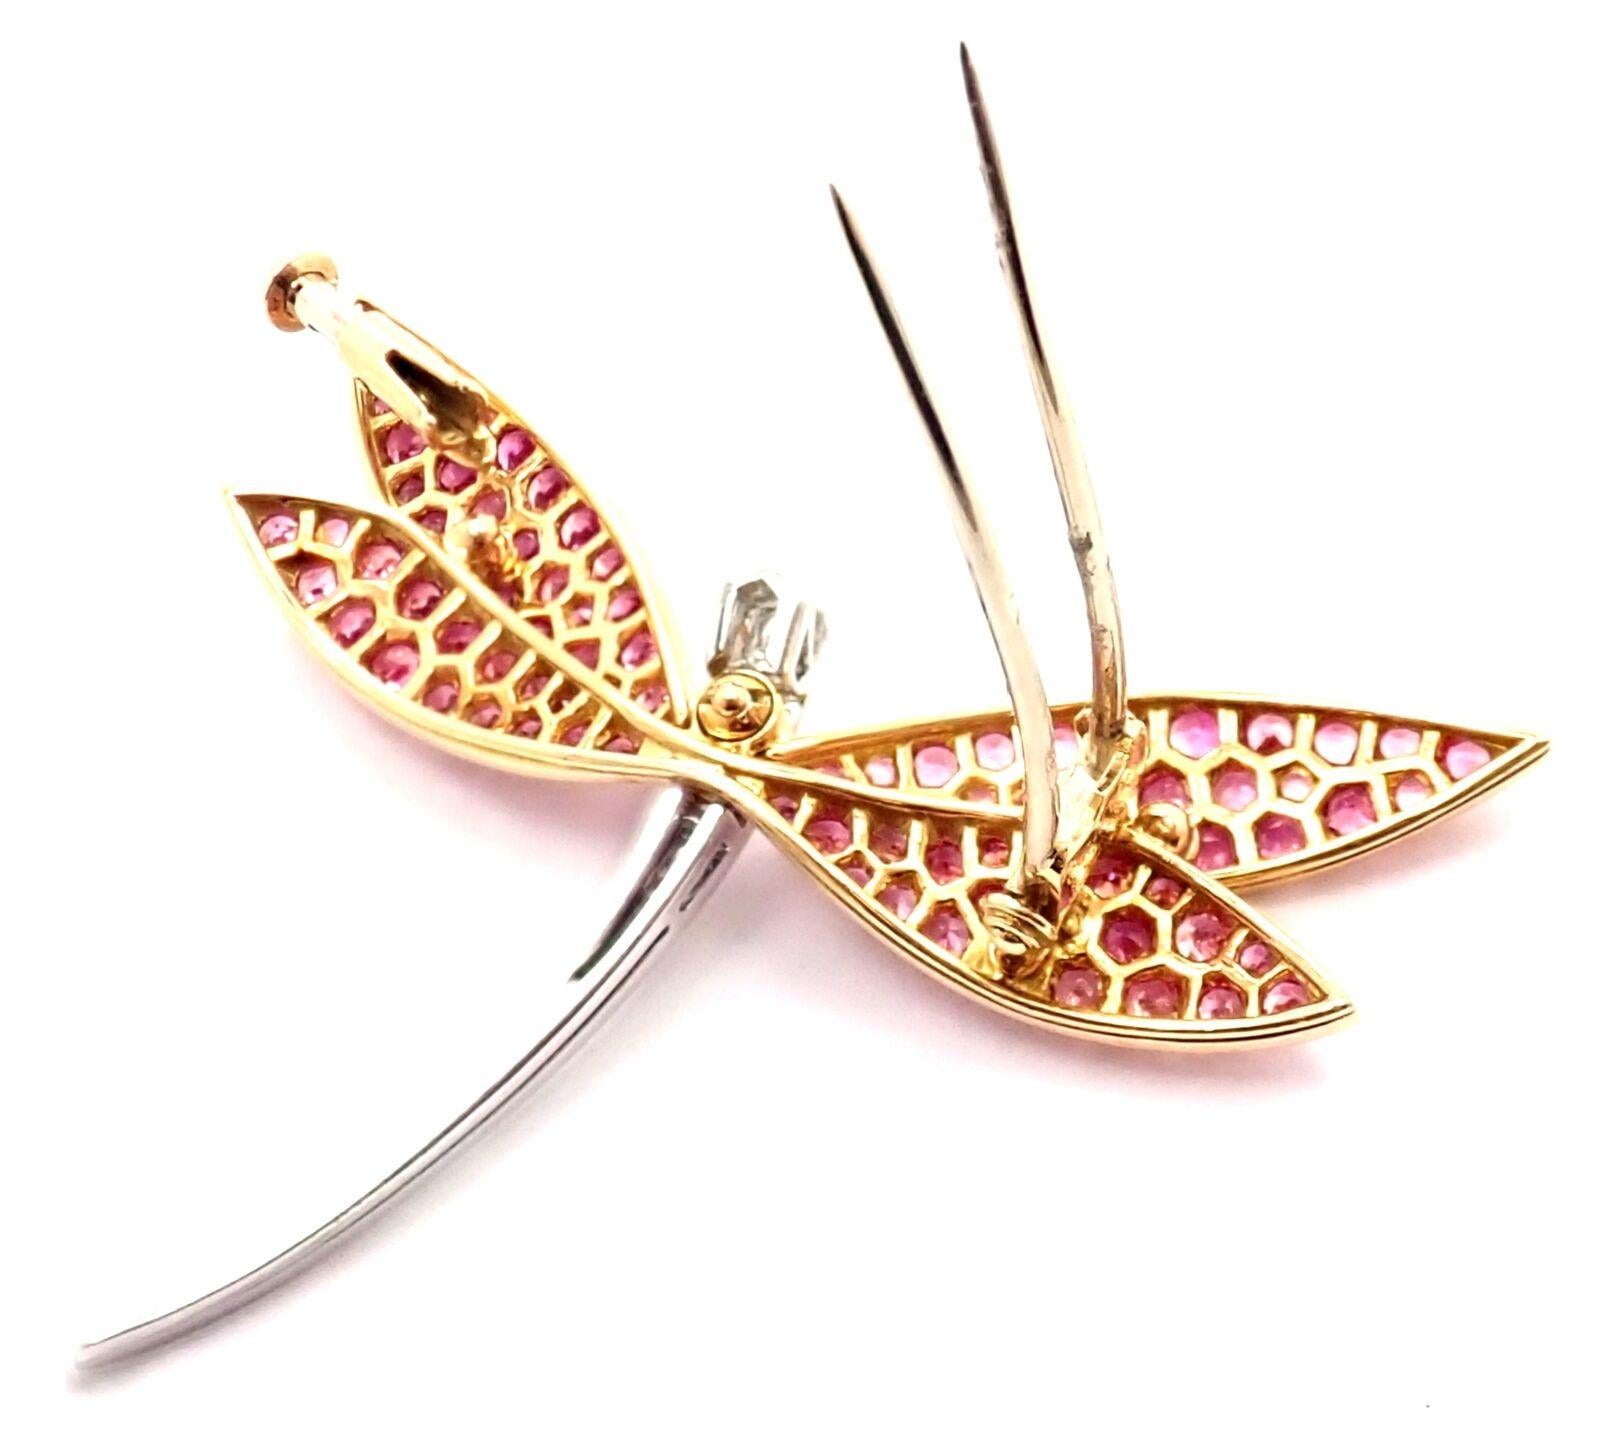 Van Cleef & Arpels Dragonfly Diamond Pink Sapphire White Gold Pin Brooch 1